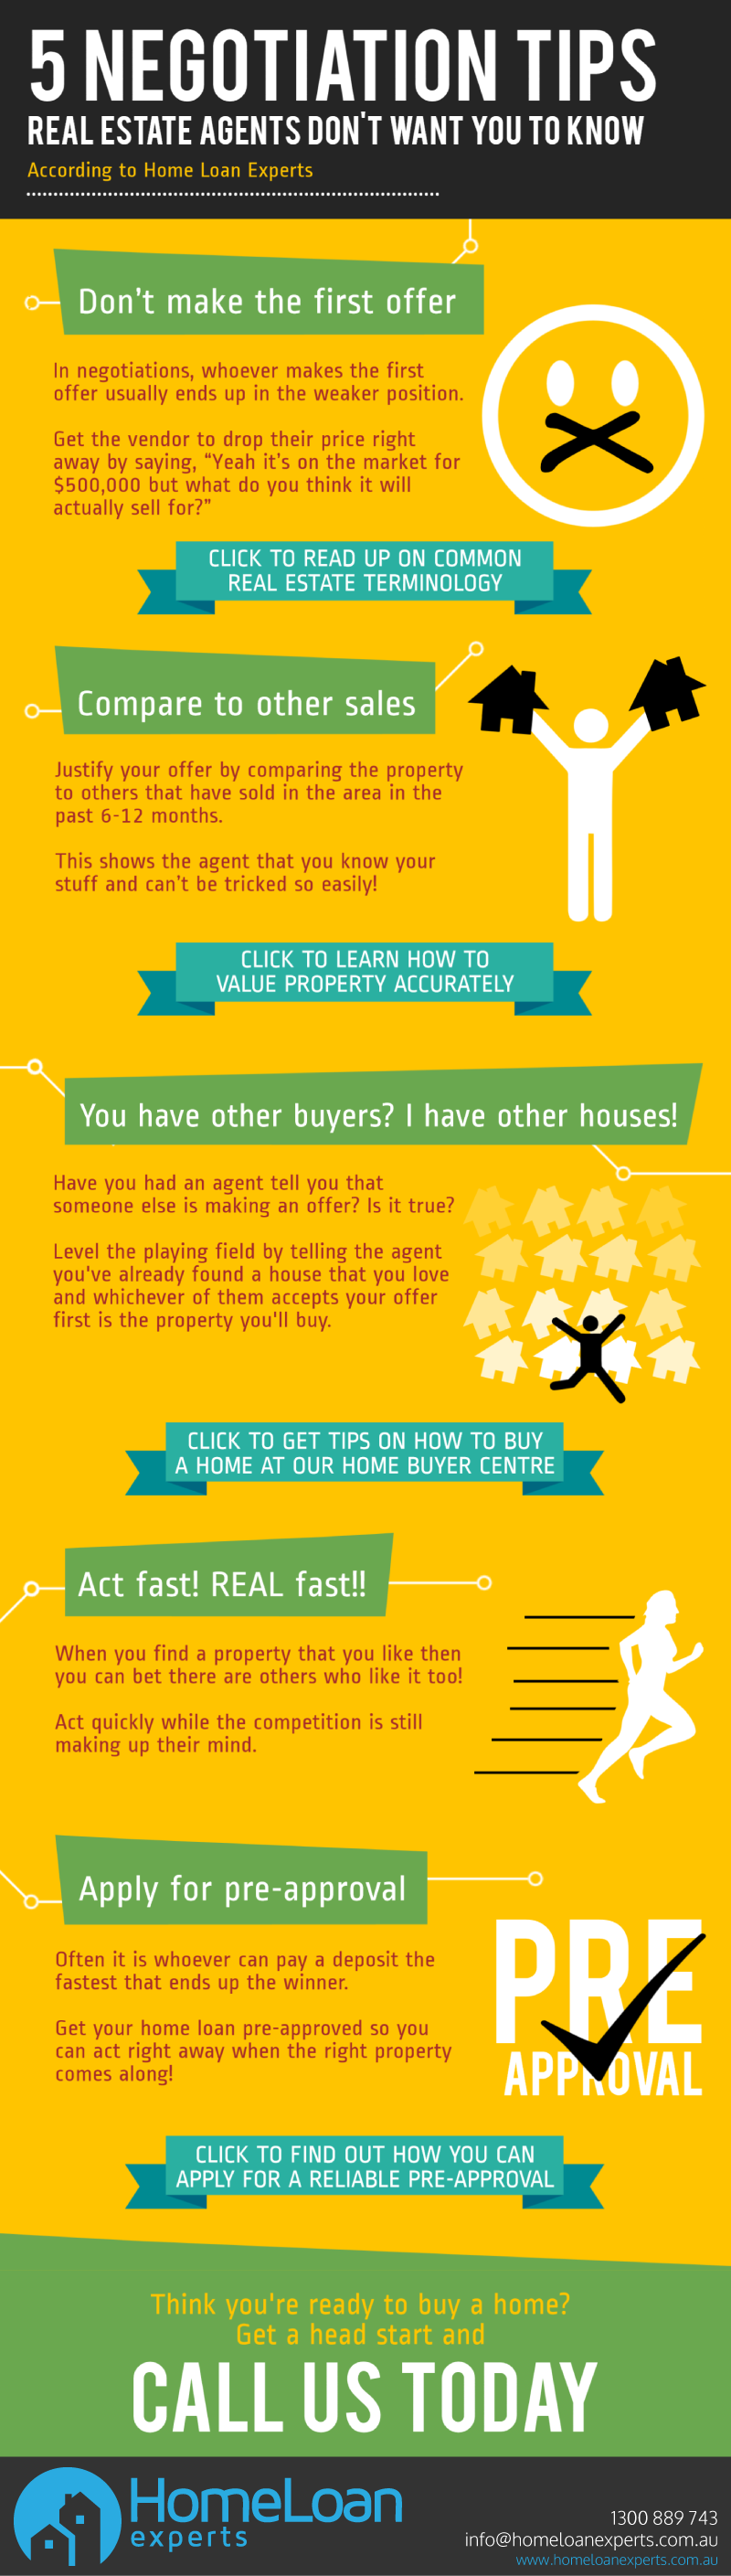 How to Get Your Real Estate License Online
